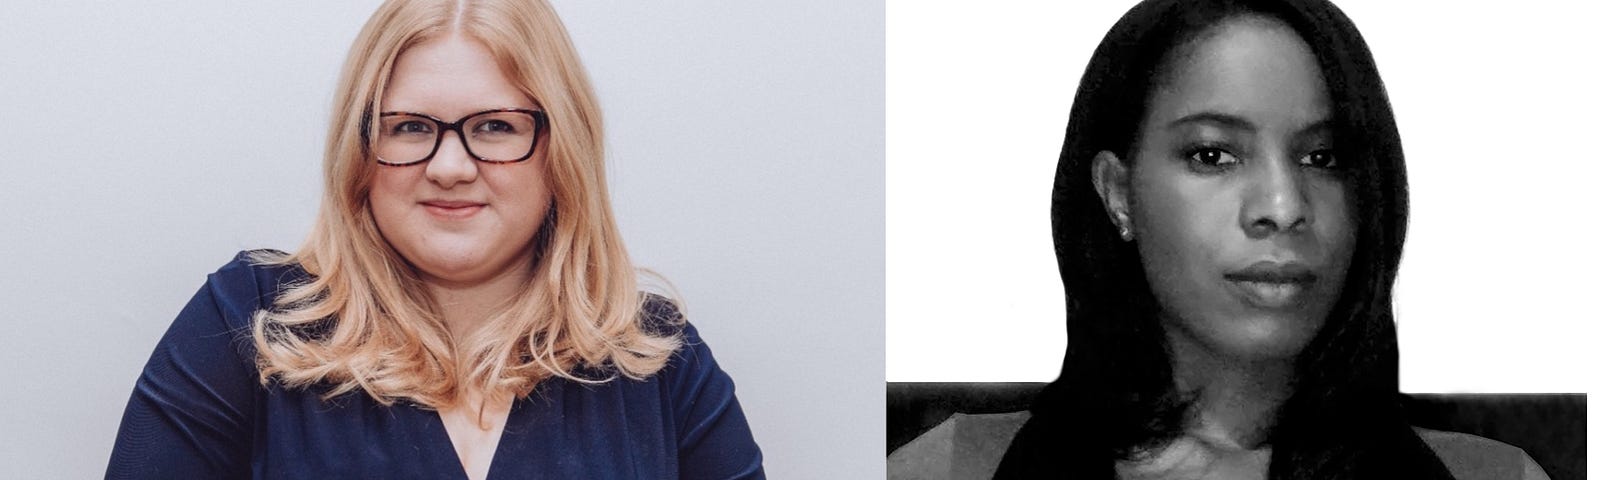 Left: Colour head and shoulders image of Amy Kavanagh. Amy has long, blonde hair, centrally parted. She wears glasses and a navy, v-neck, short-sleeved dress. Right: Black and white head and shoulders image of Natasha Trotman. Natasha has dark brown shoulder-length hair, a round-neck top, and a black tank top.